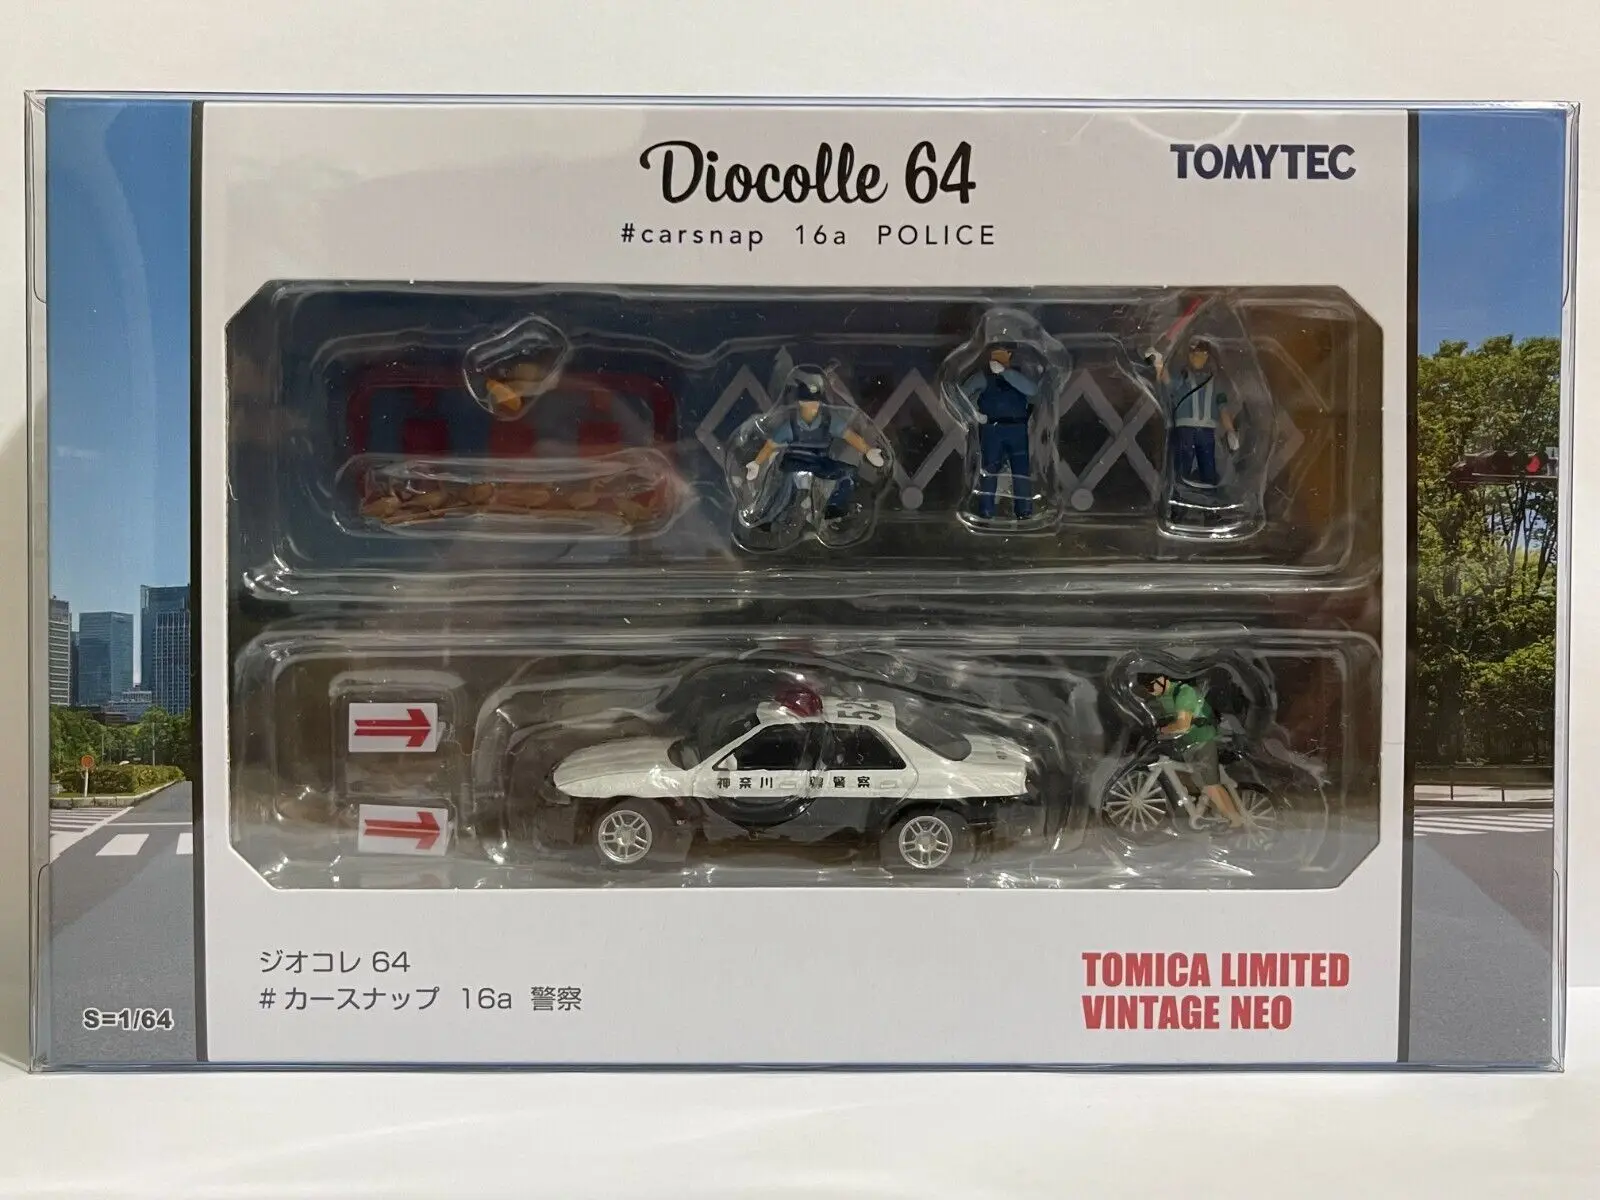 

Tomica Limited Vintage Neo Tomytec Diocolle 64 Carsnap 16a Skyline Police Diecast Model Car Collection Limited Edition Hobby Toy